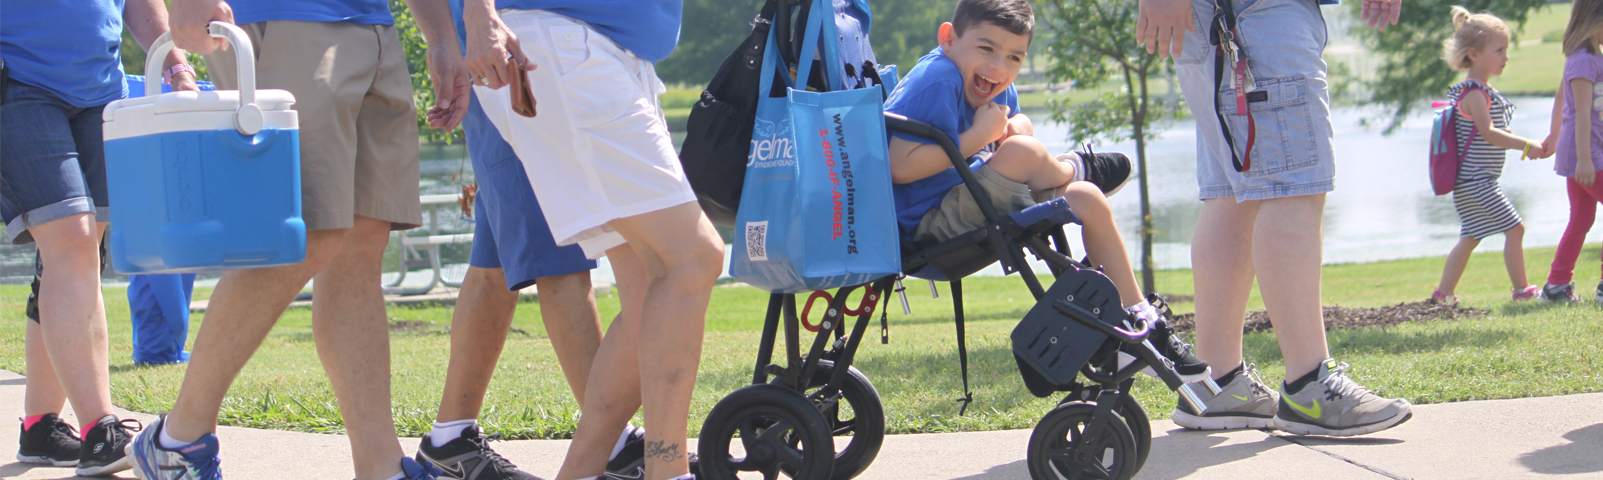 People at an ASF Walk and a boy with Angelman syndrome in a stroller laughing